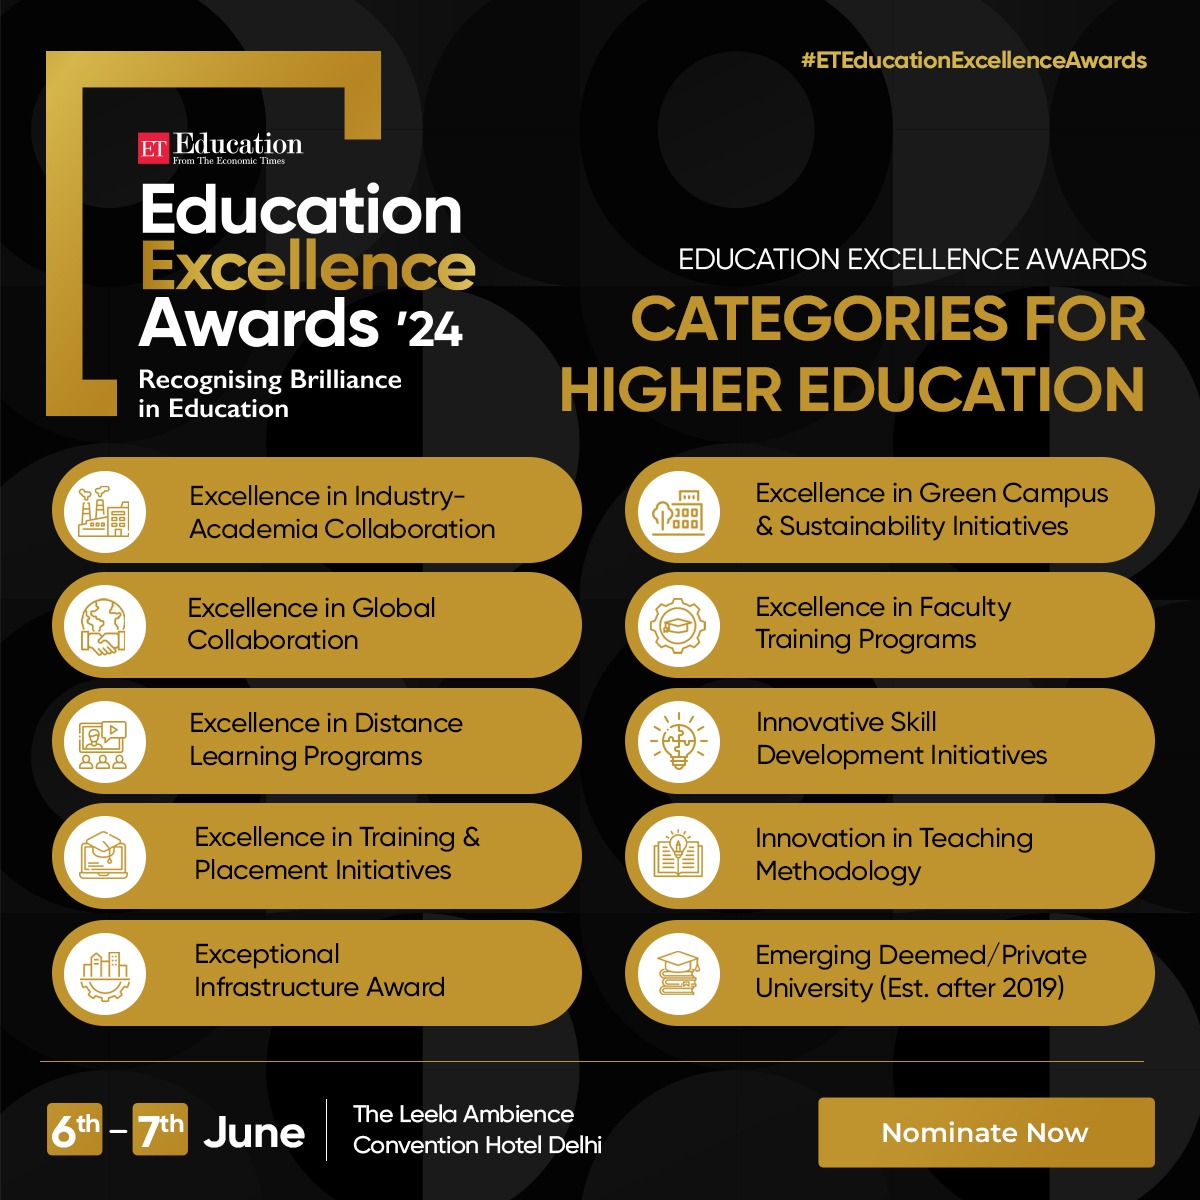 🎓 Celebrating Academic Excellence at its Peak! 🏅 Join us at the #ETEducationExcellenceAwards as we honor the pinnacle of higher education achievement. 

Nominate Now - bit.ly/4b9KFVN

#ETEducationExcellenceAwards #ETEducation #Awards #Education #TechInEducation